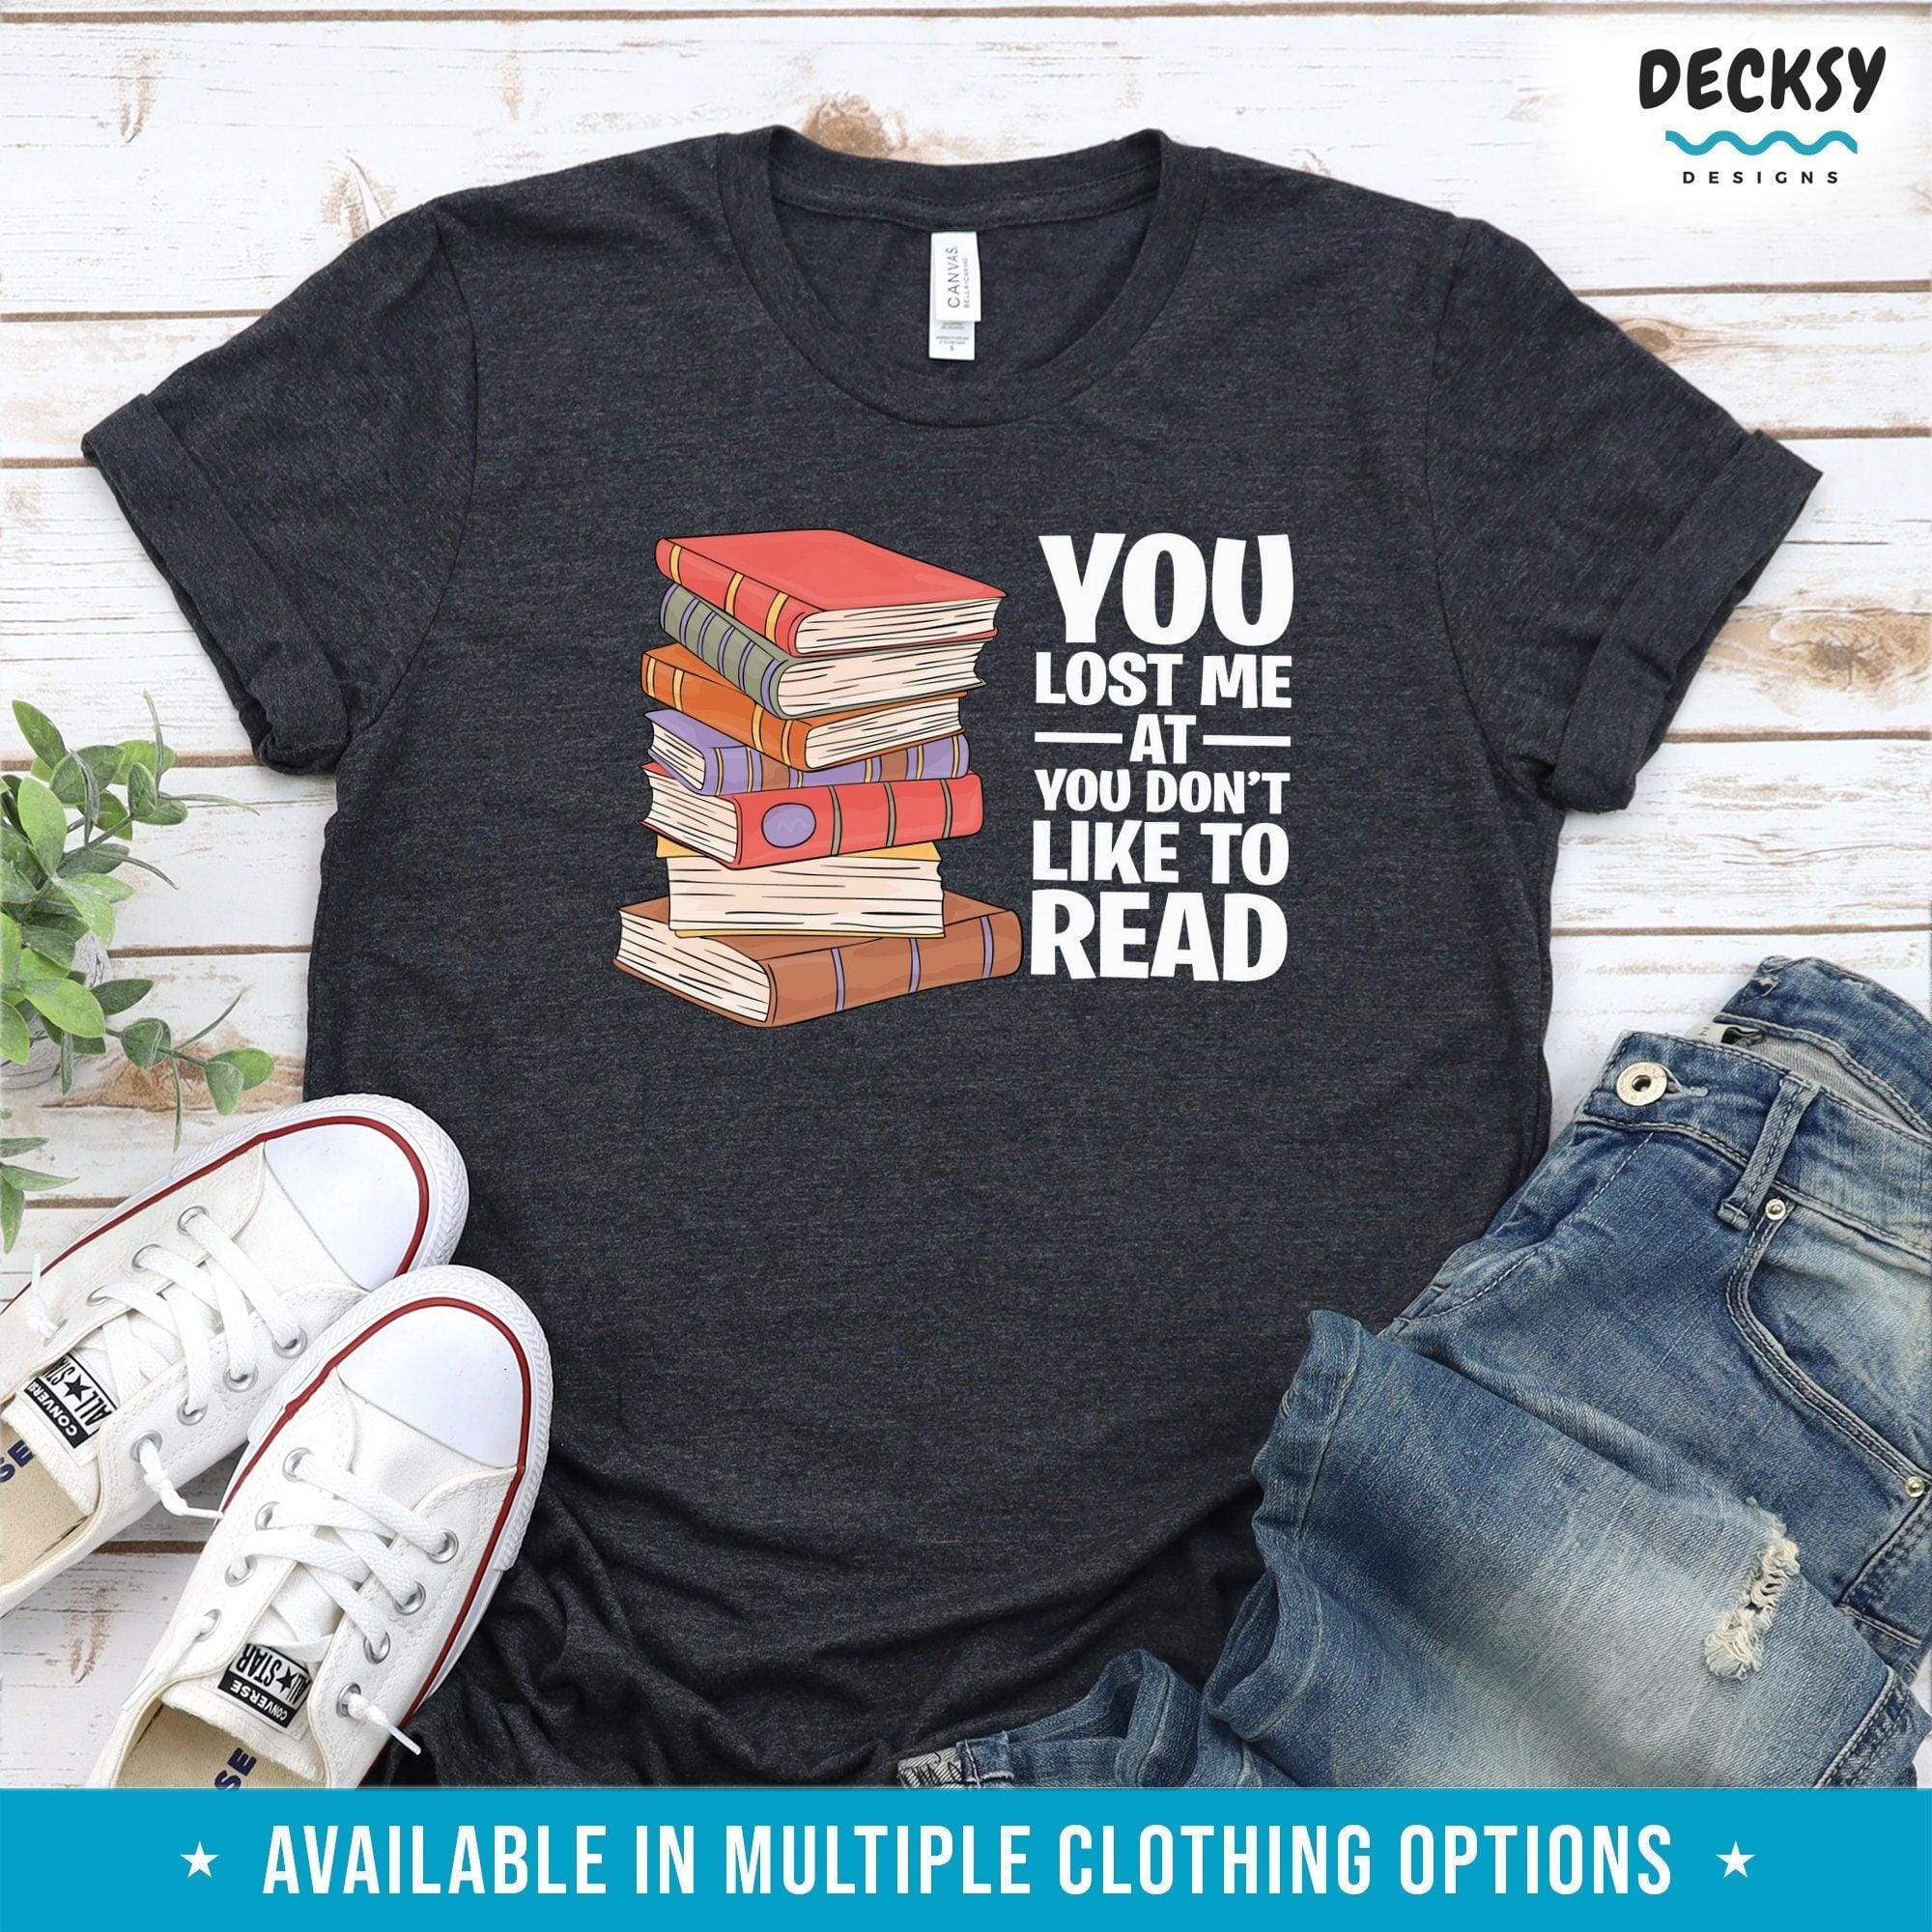 Book Nerd Shirt, Gift For Book Lover-Clothing:Gender-Neutral Adult Clothing:Tops & Tees:T-shirts:Graphic Tees-DecksyDesigns